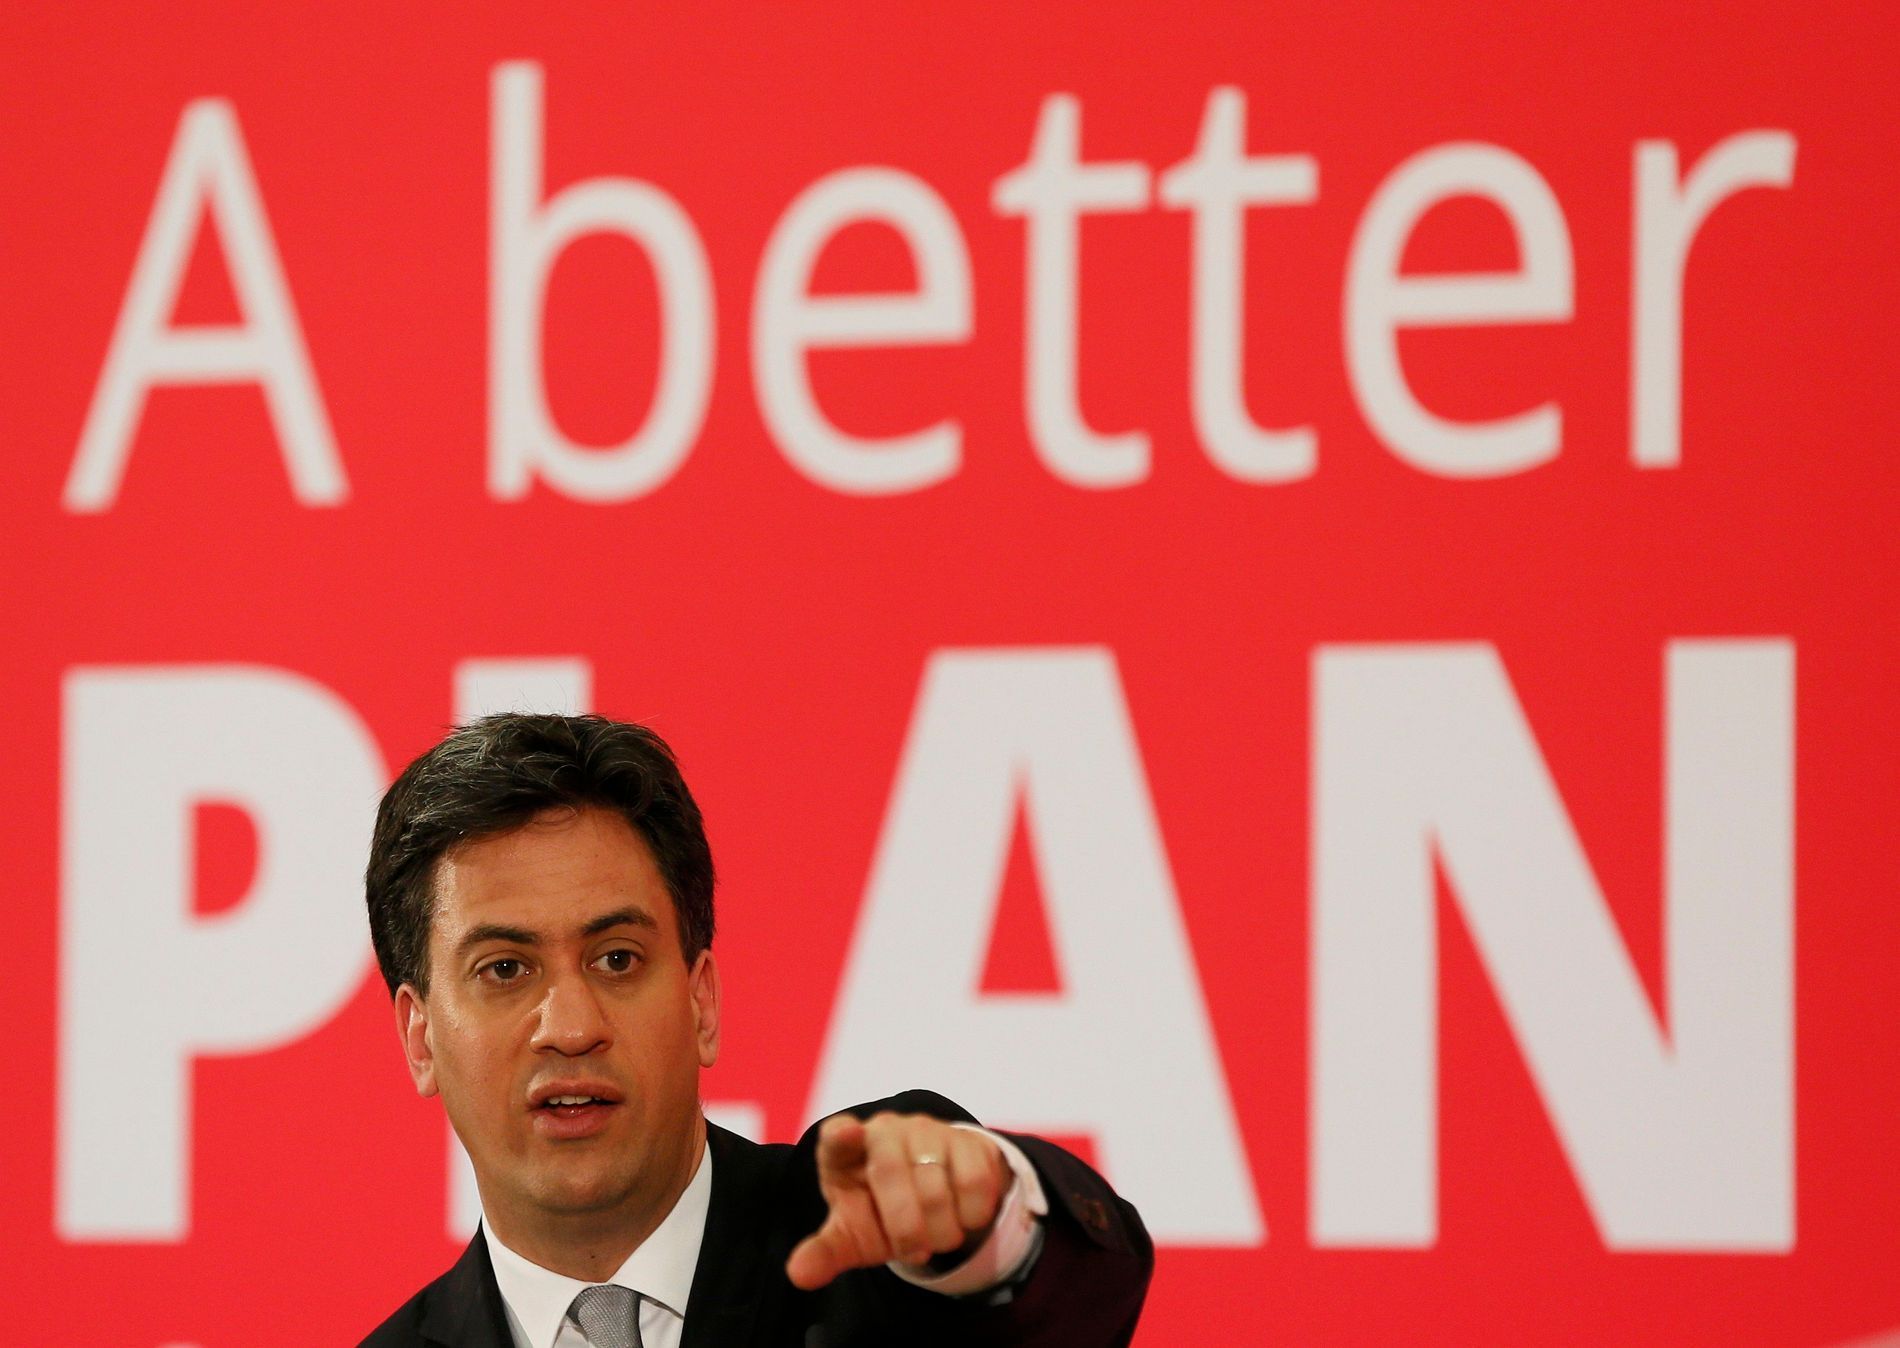 Britain's opposition Labour Party leader Ed Miliband gestures as he hosts a People's Question Time in Kempston